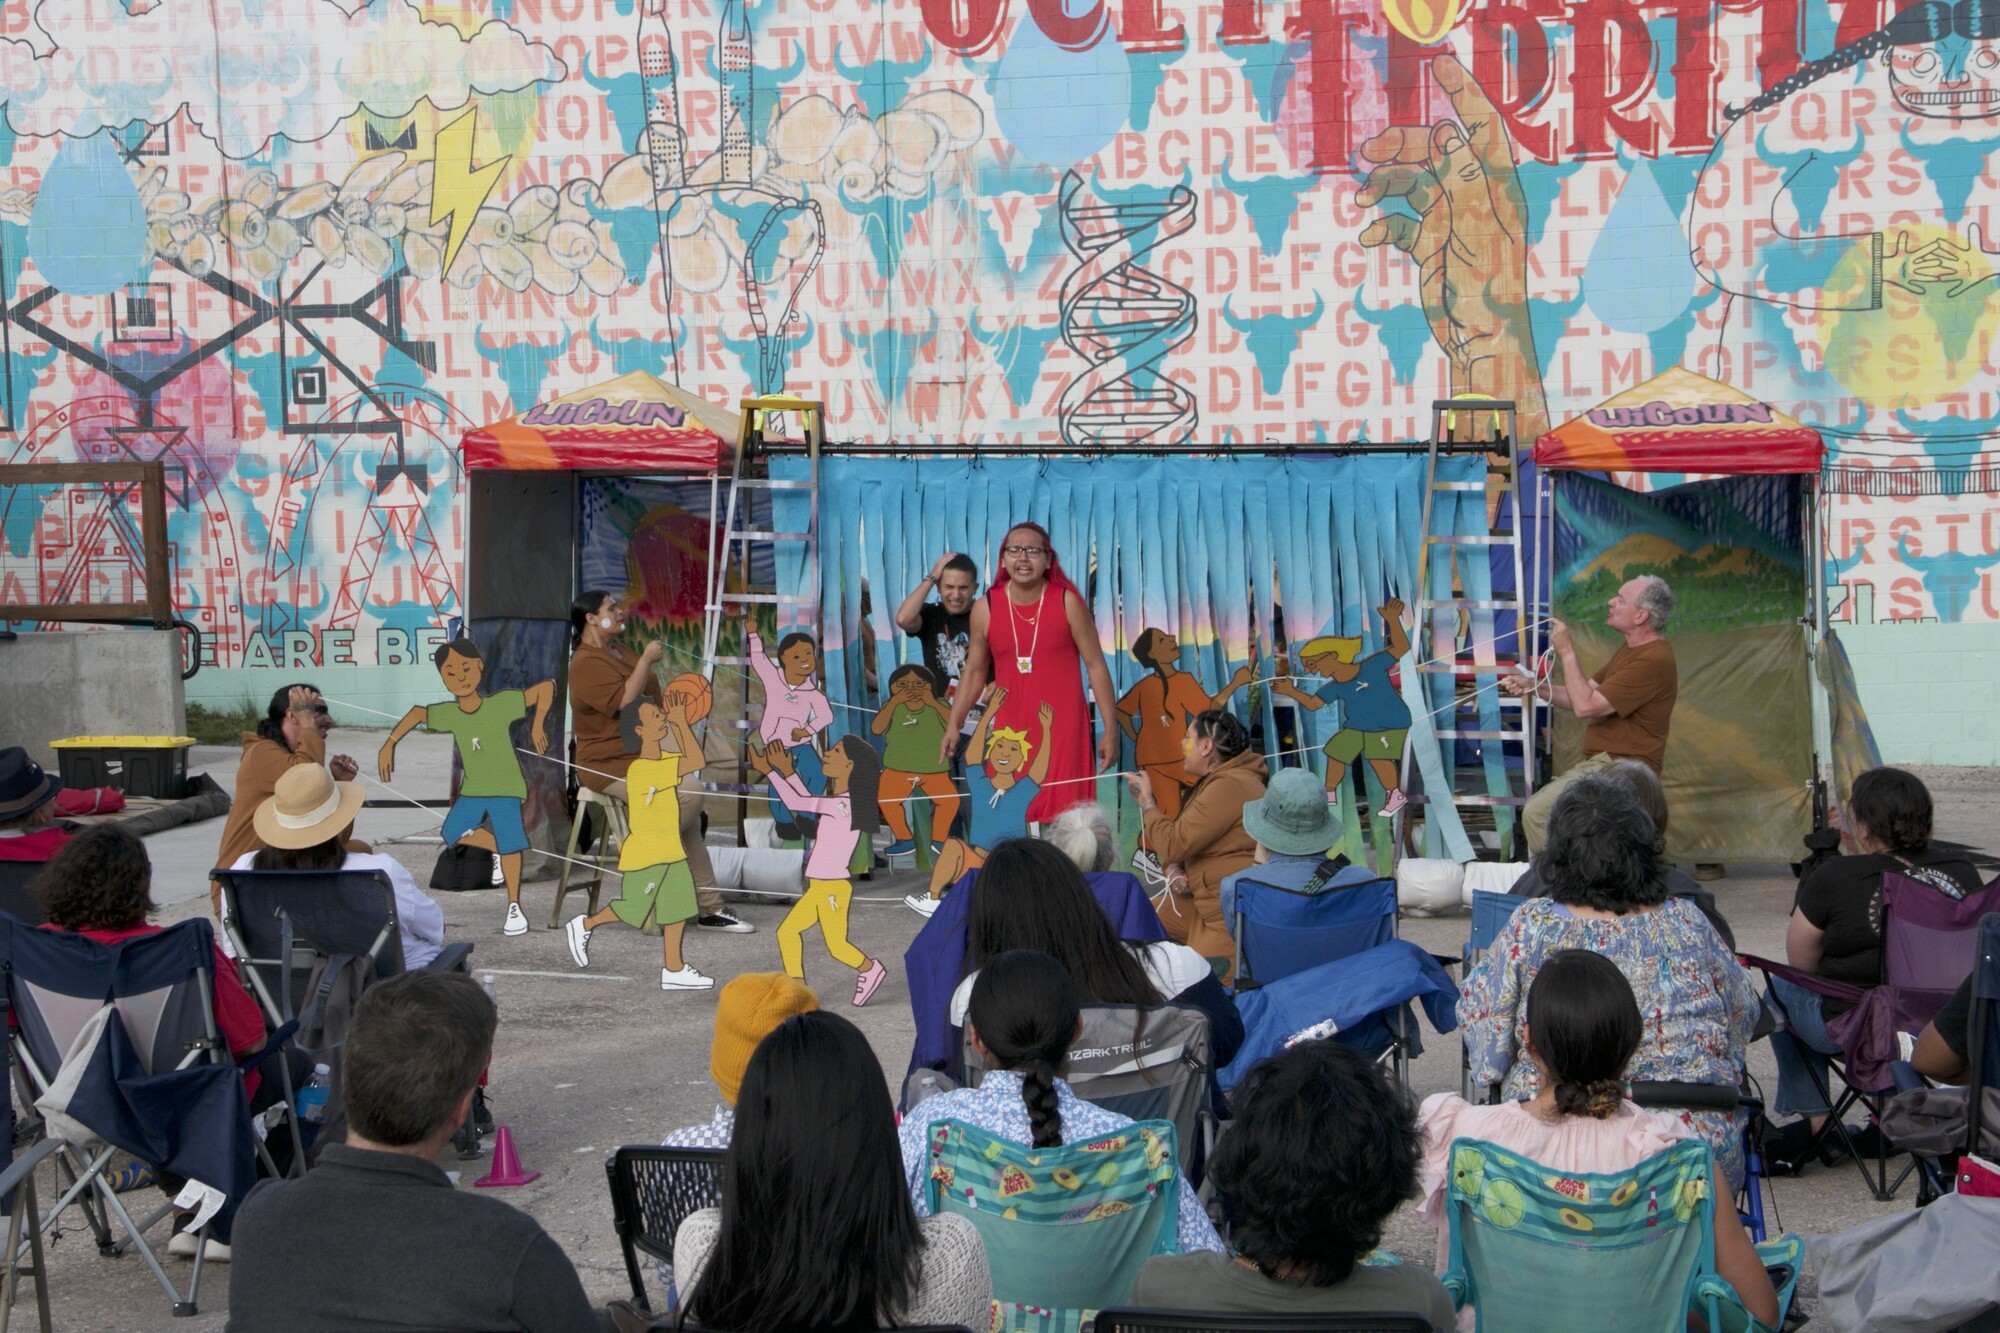 A performer speaks passionately while surrounded by puppets manipulated by other cast members.